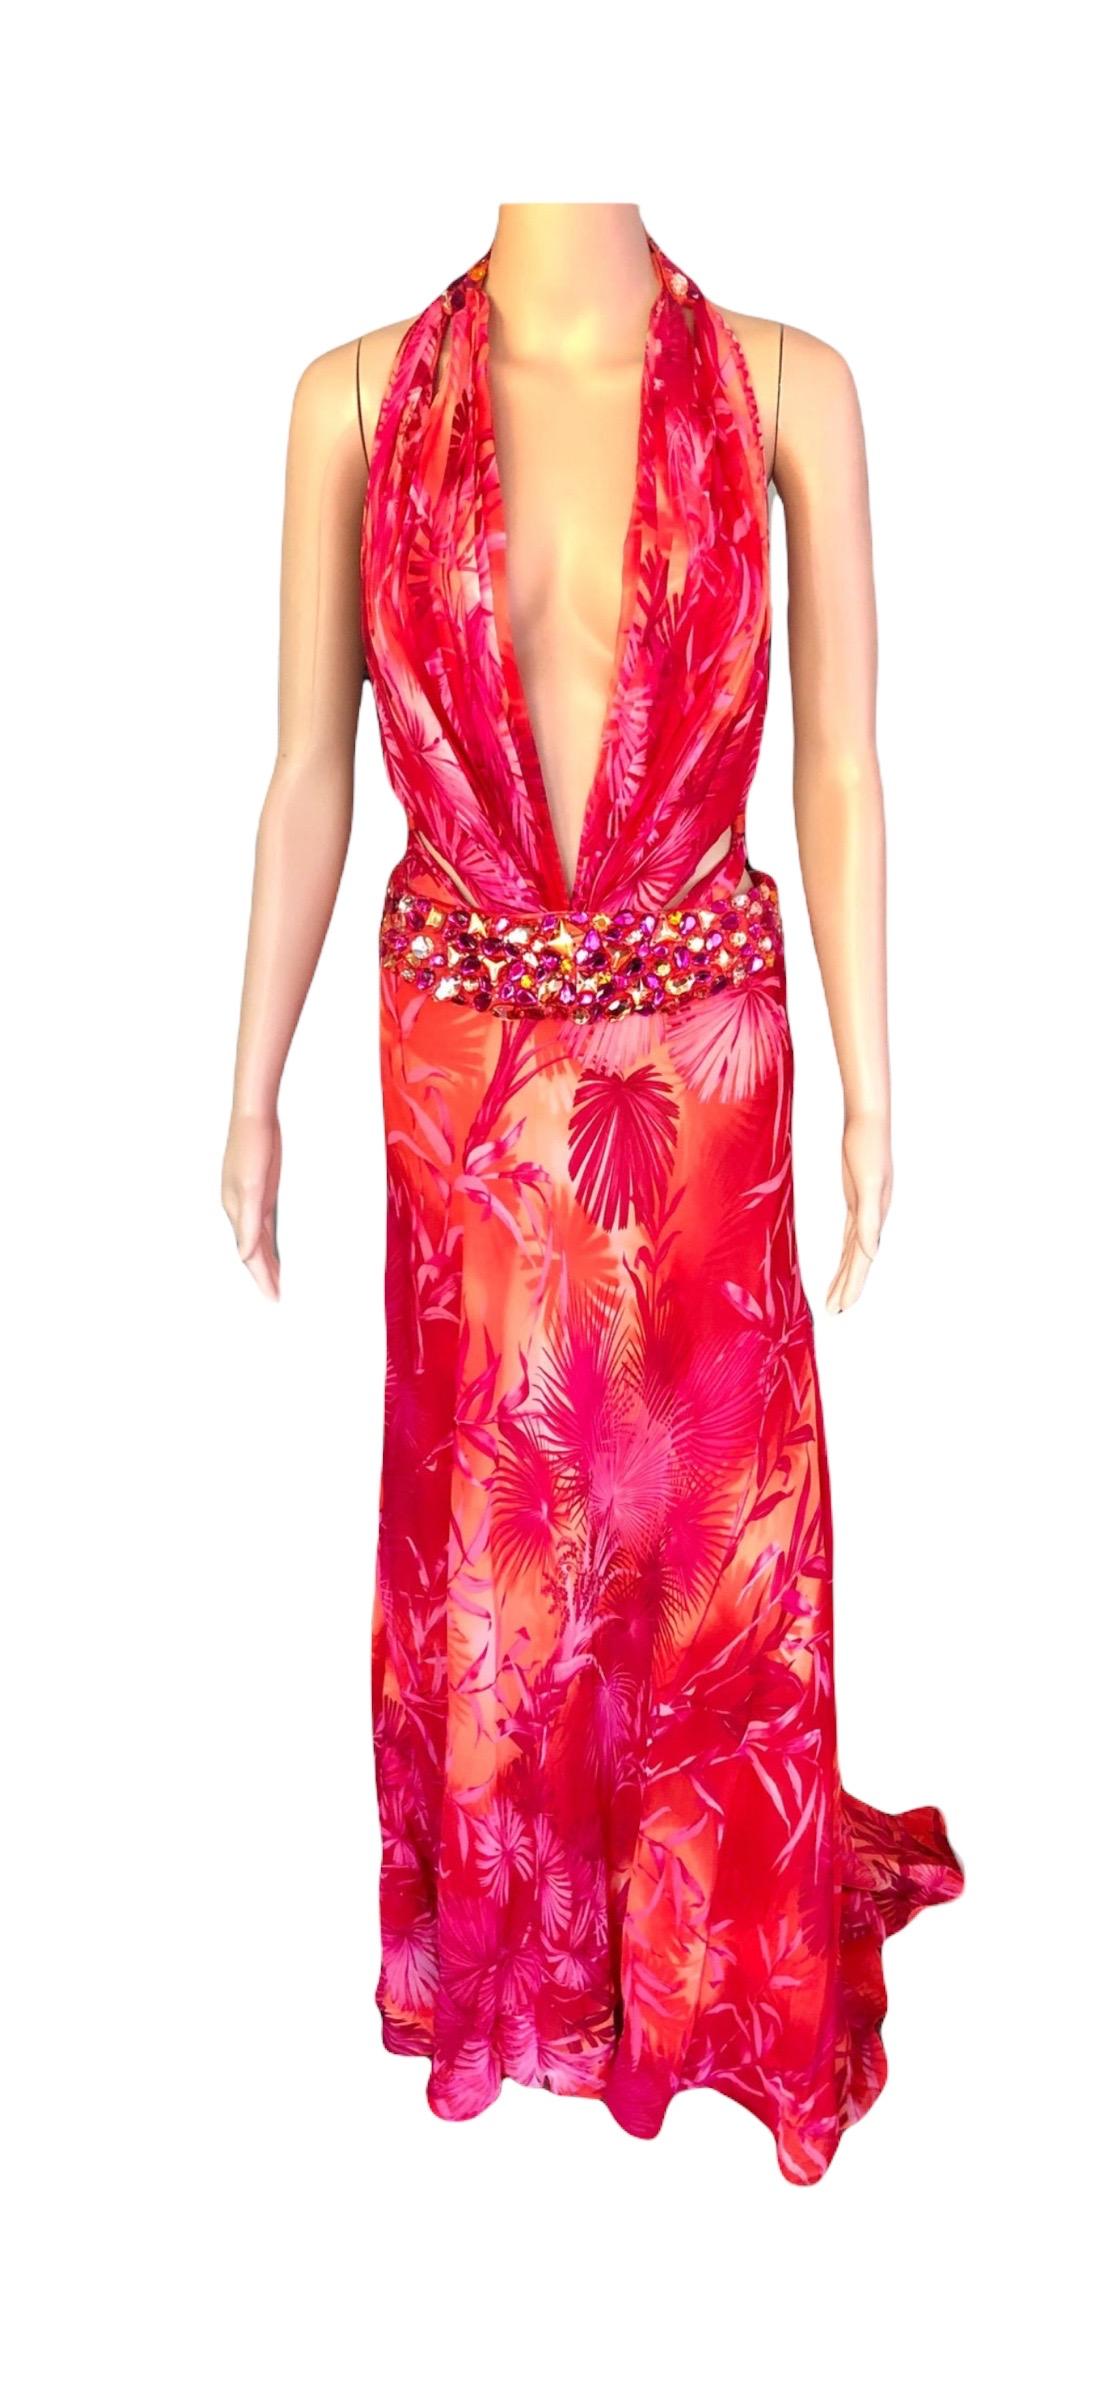 Gianni Versace S/S 2000 Runway Embellished Jungle Print Evening Dress Gown For Sale 8